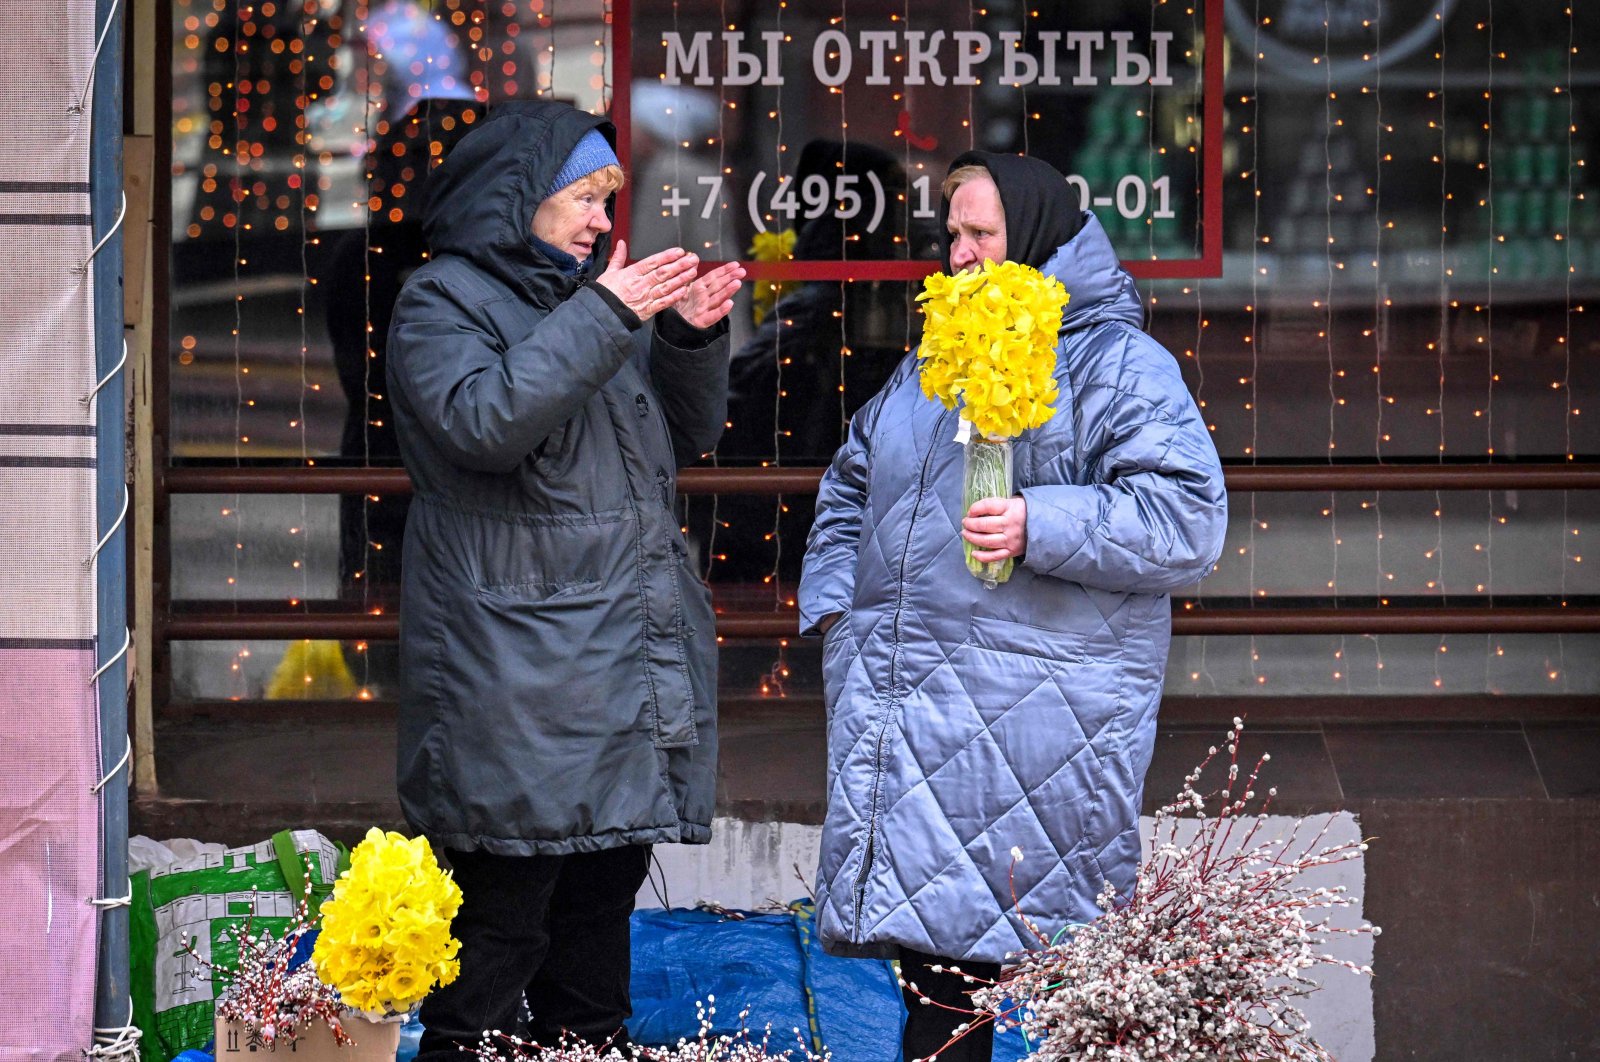 Two street vendors sell spring flowers and flowering willow branches in central Moscow, Russia, April 13, 2022. (AFP Photo)